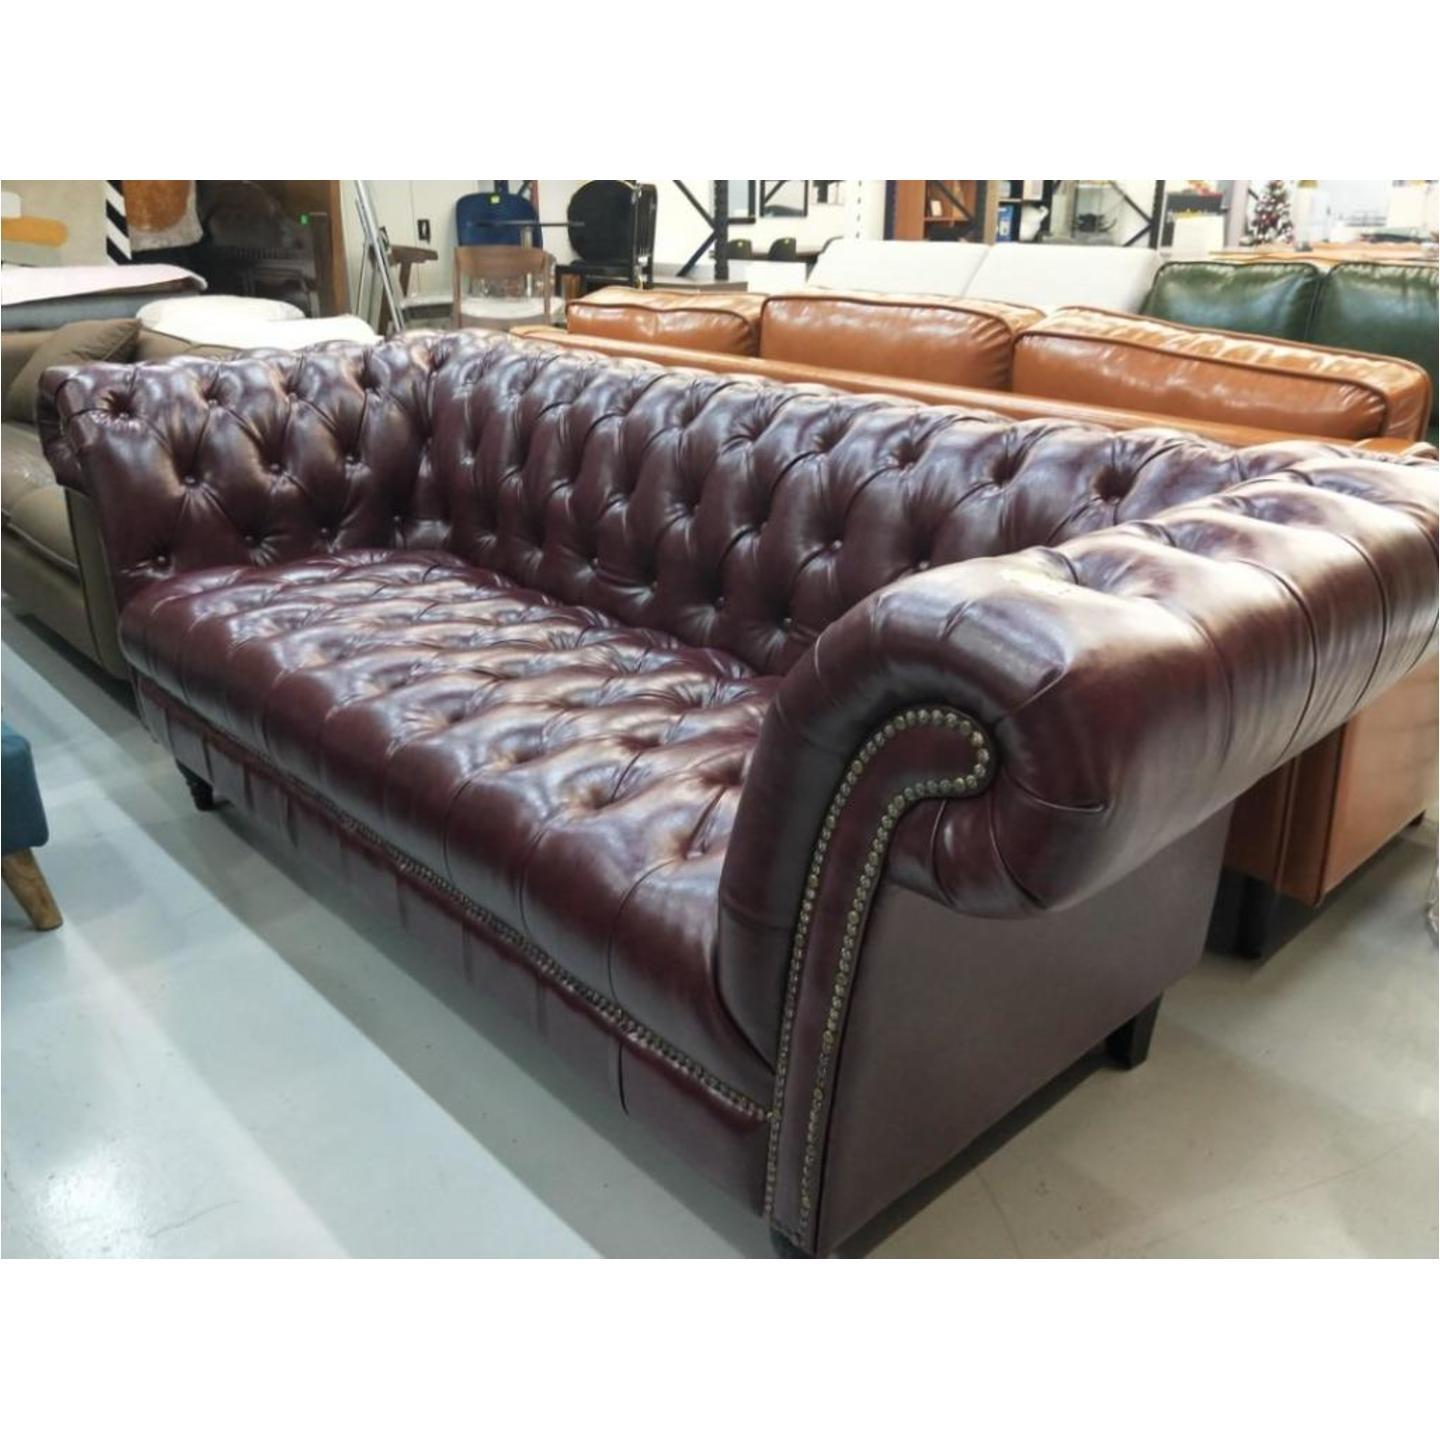 (PRE ORDER) VENIVA 3 Seater Classical Chesterfield in BURGUNDY RED PU - Estimated Delivery by End August 2022